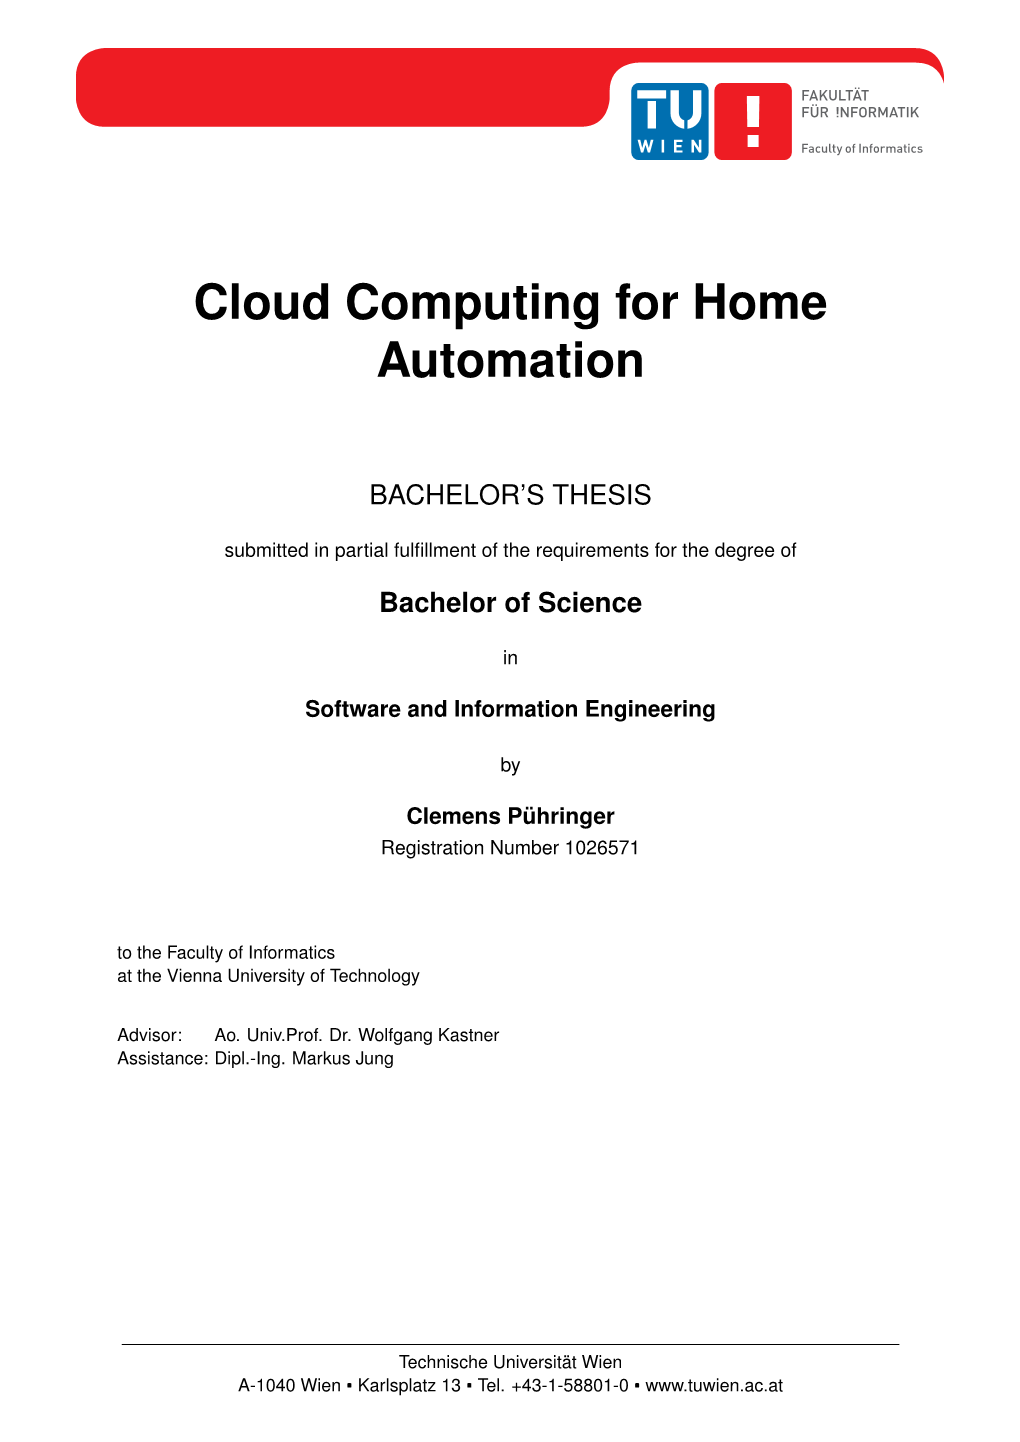 Cloud Computing for Home Automation